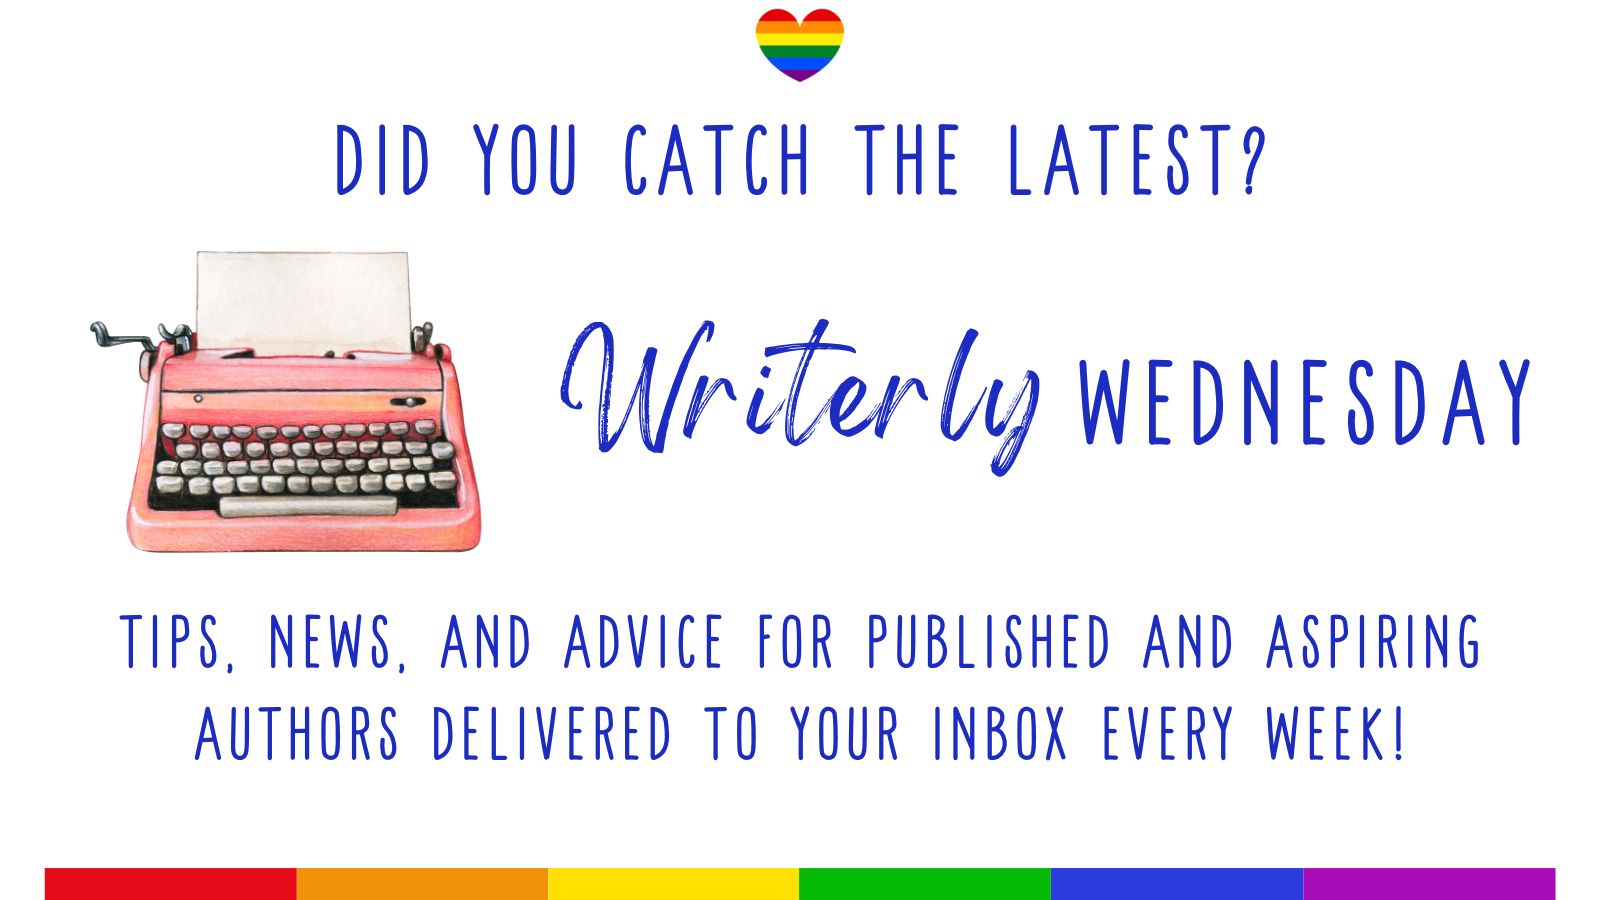 Did you catch the latest Writerly Wednesday? Tips, news, and advice for published and aspiring authors delivered to your inbox every week!